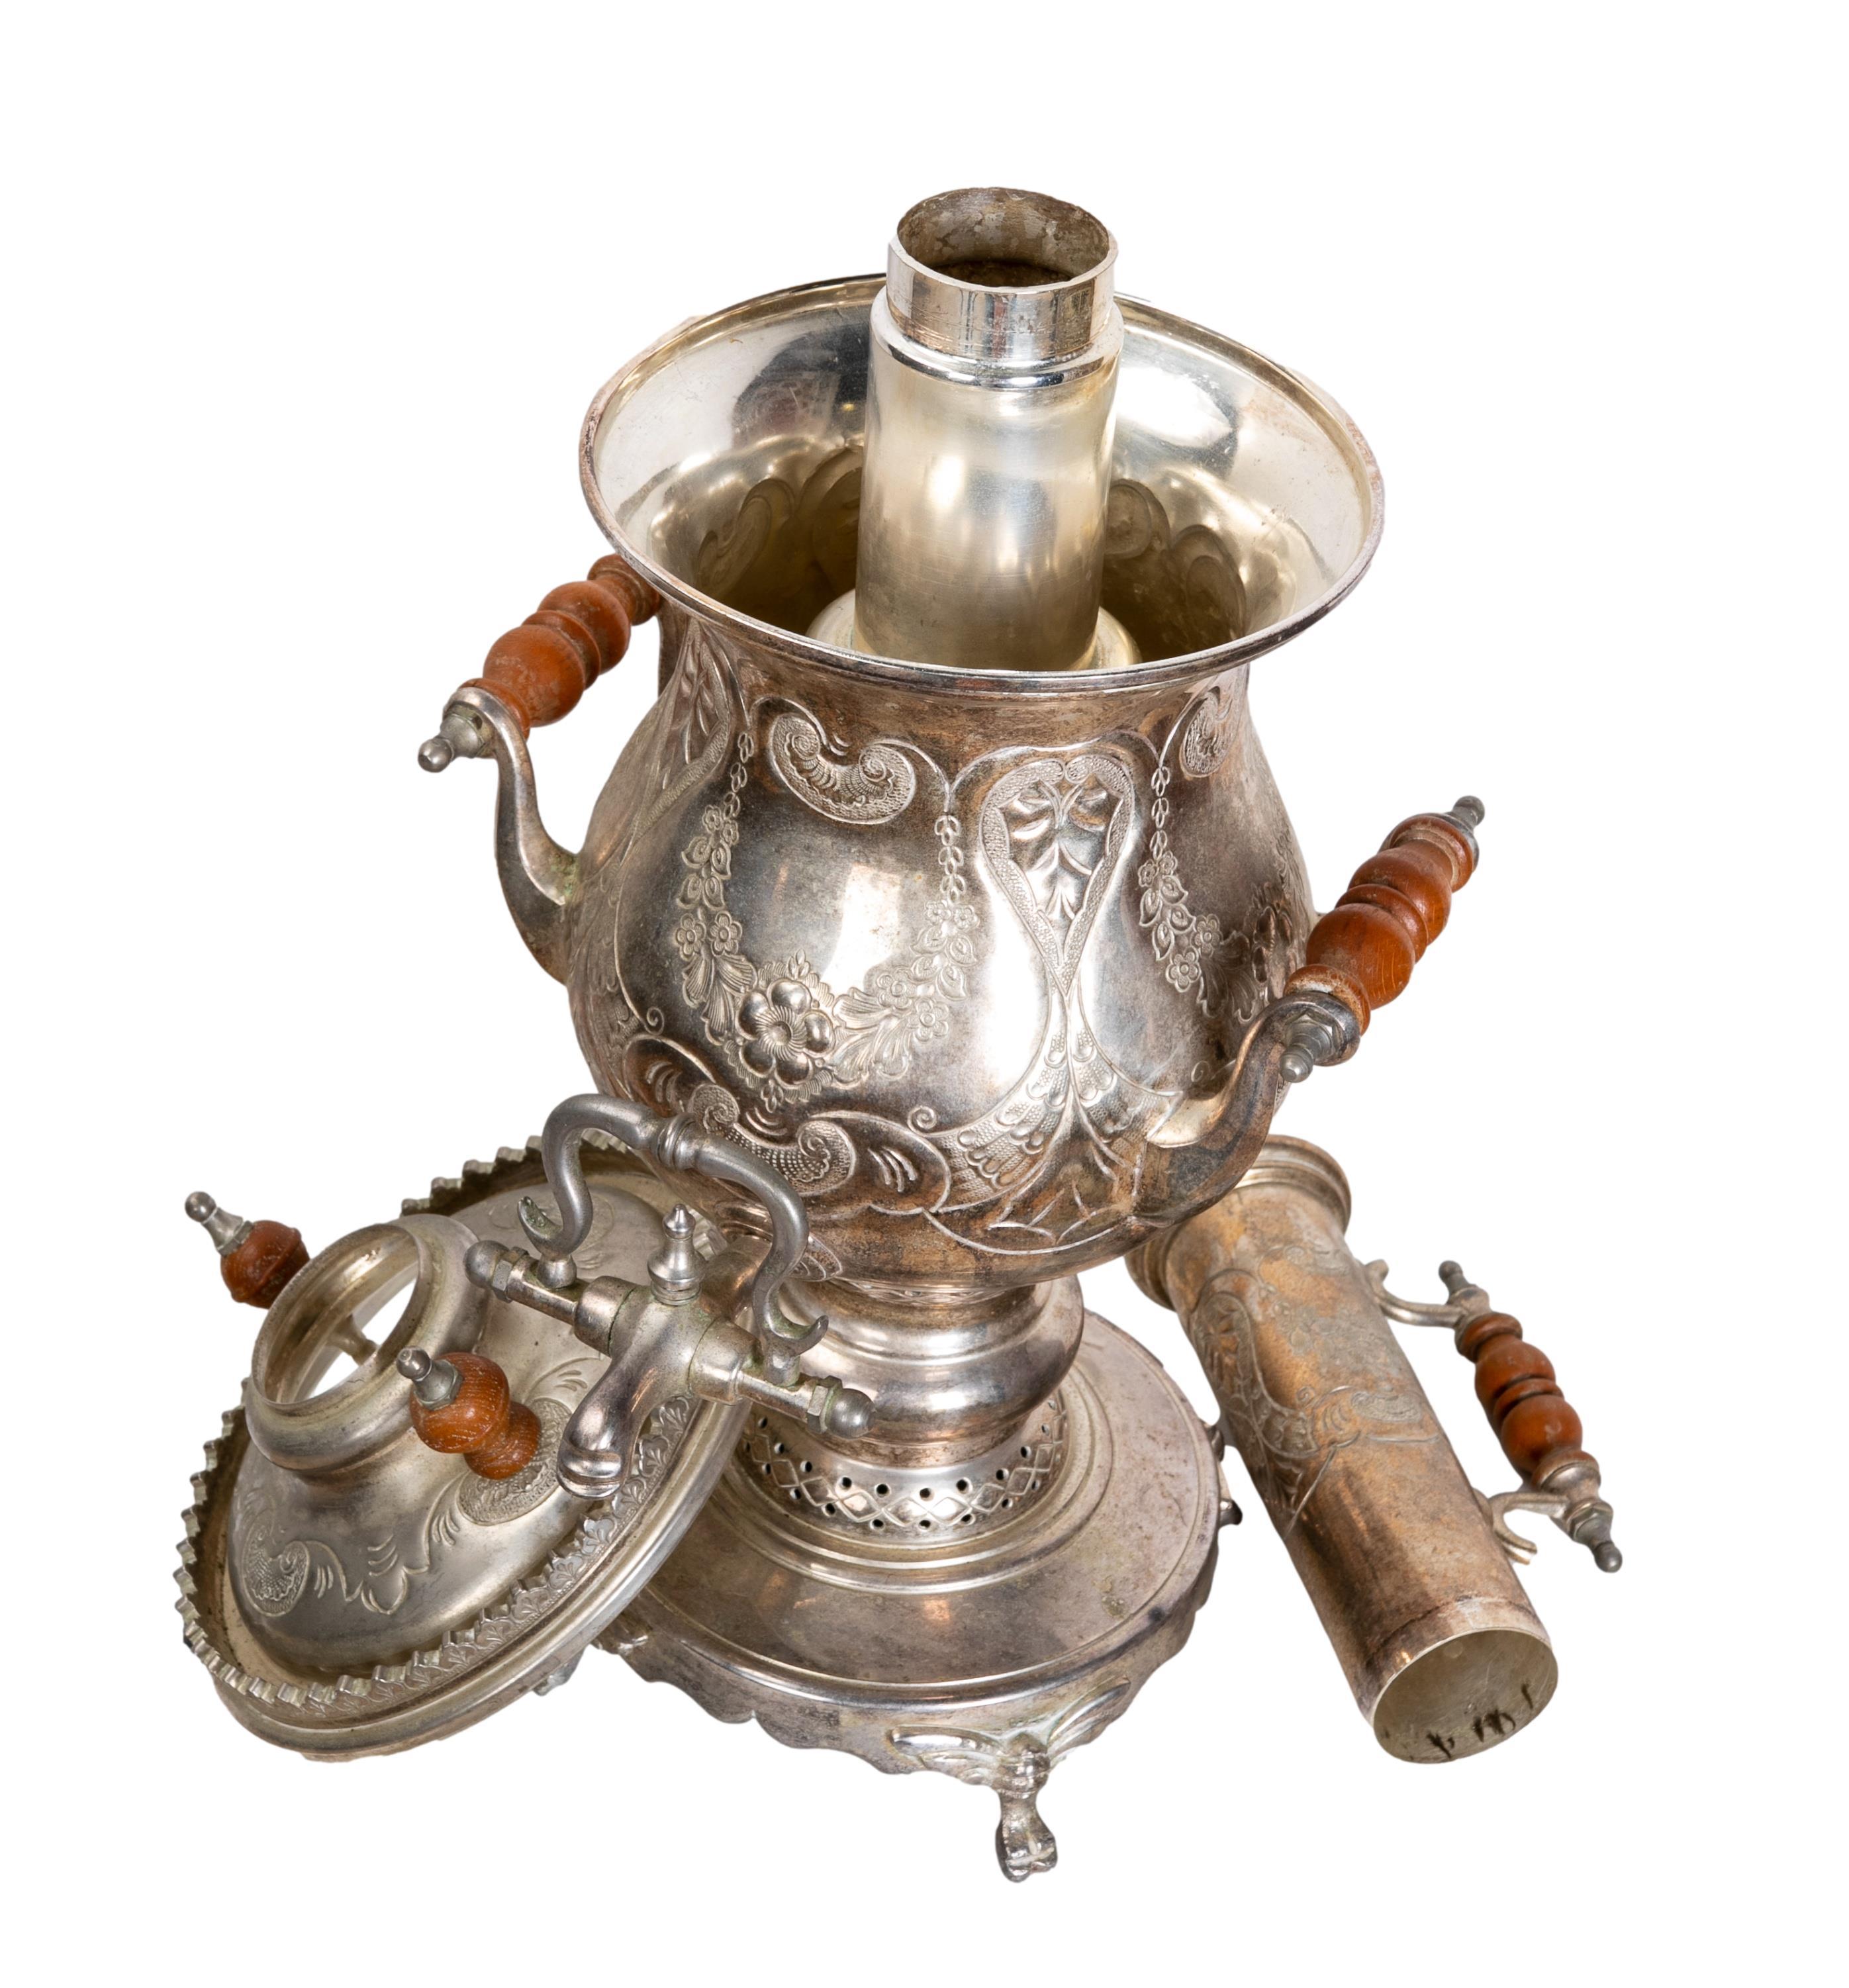 1980s Moroccan Silver-Plated Metal Samovar with Wooden Handles 6